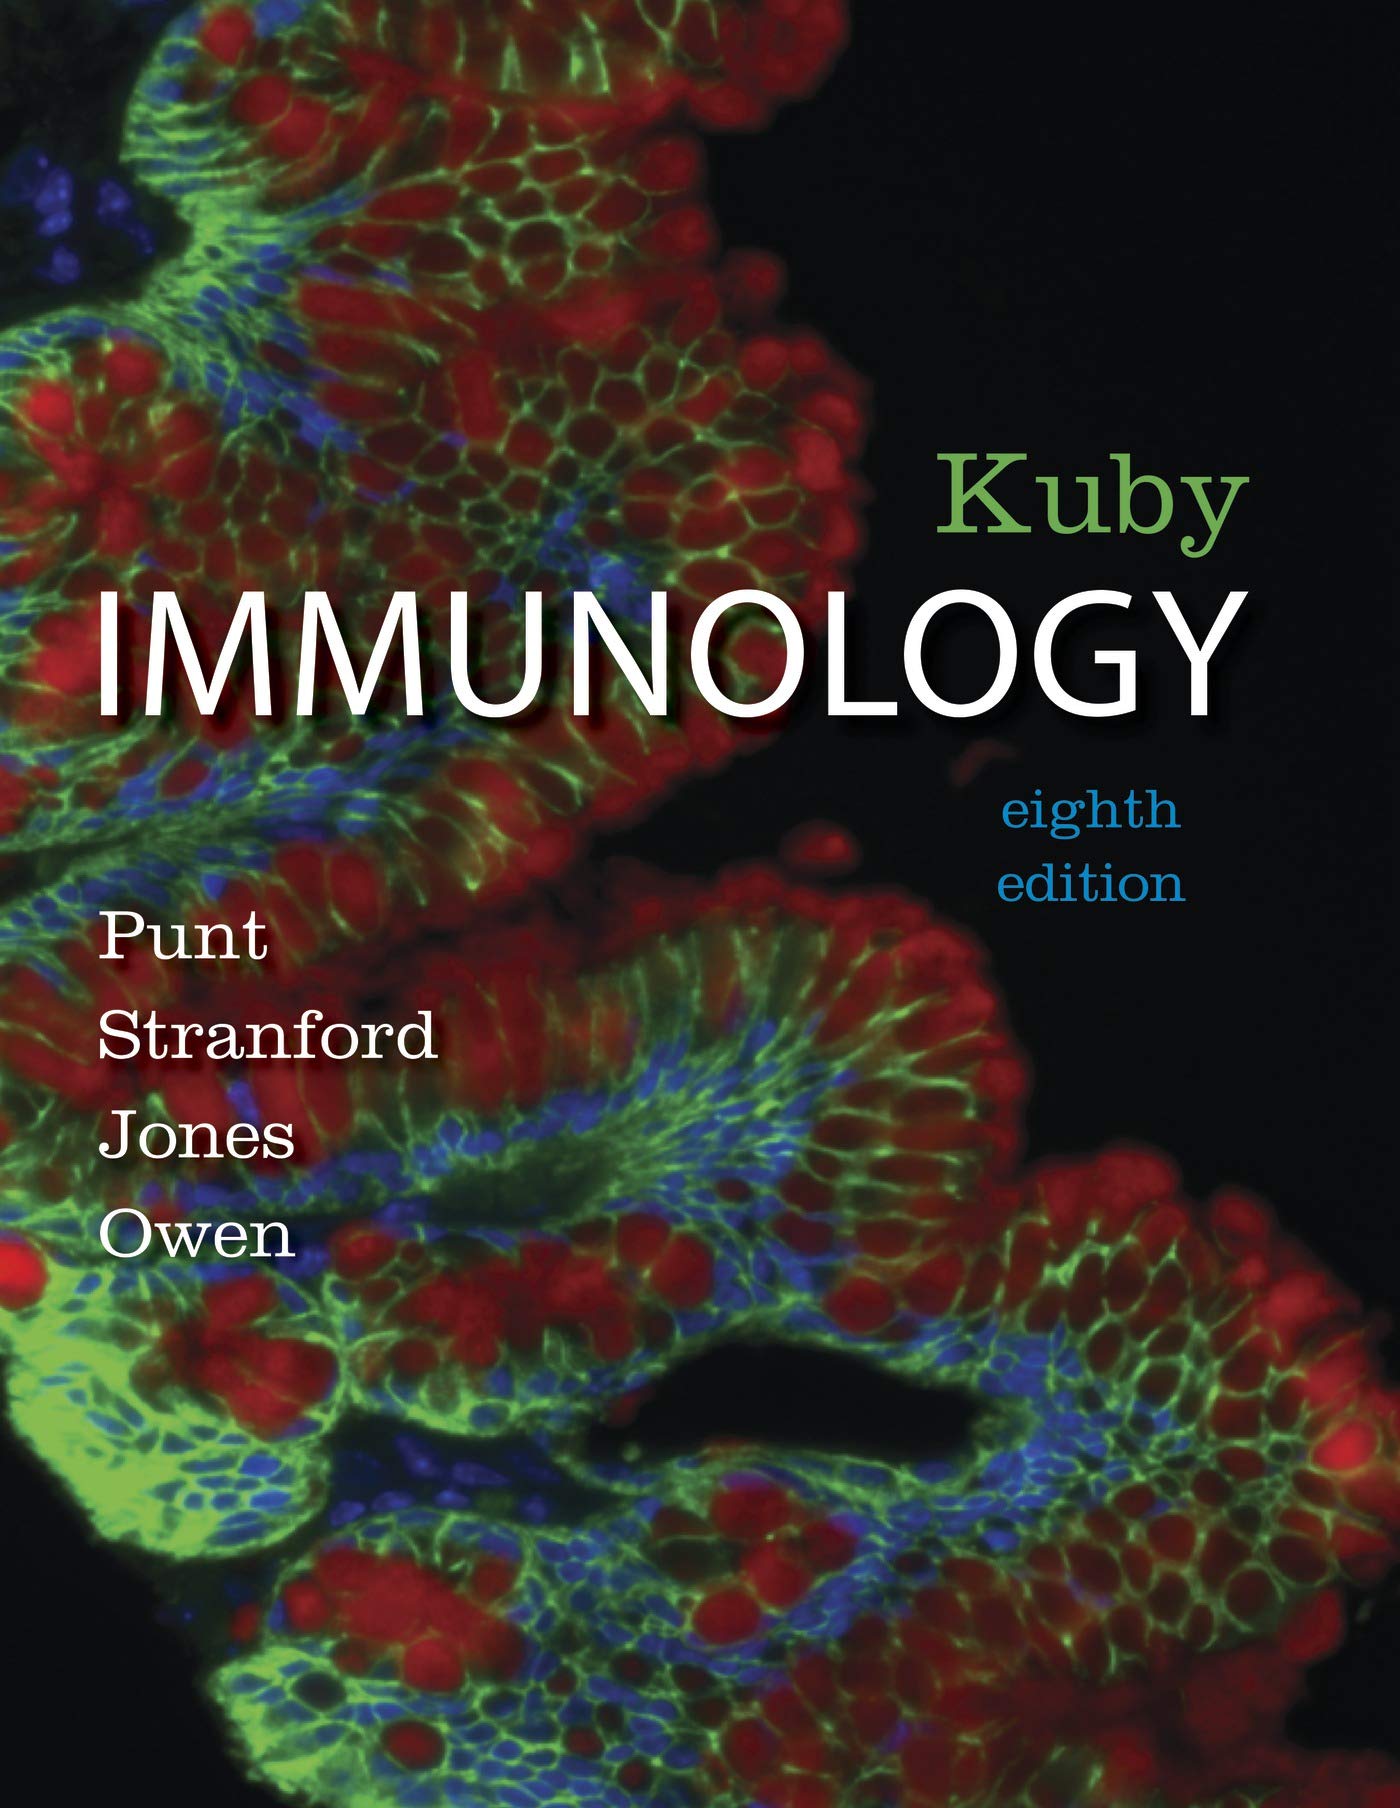 Kuby IMMUNOLOGY, 8th edition